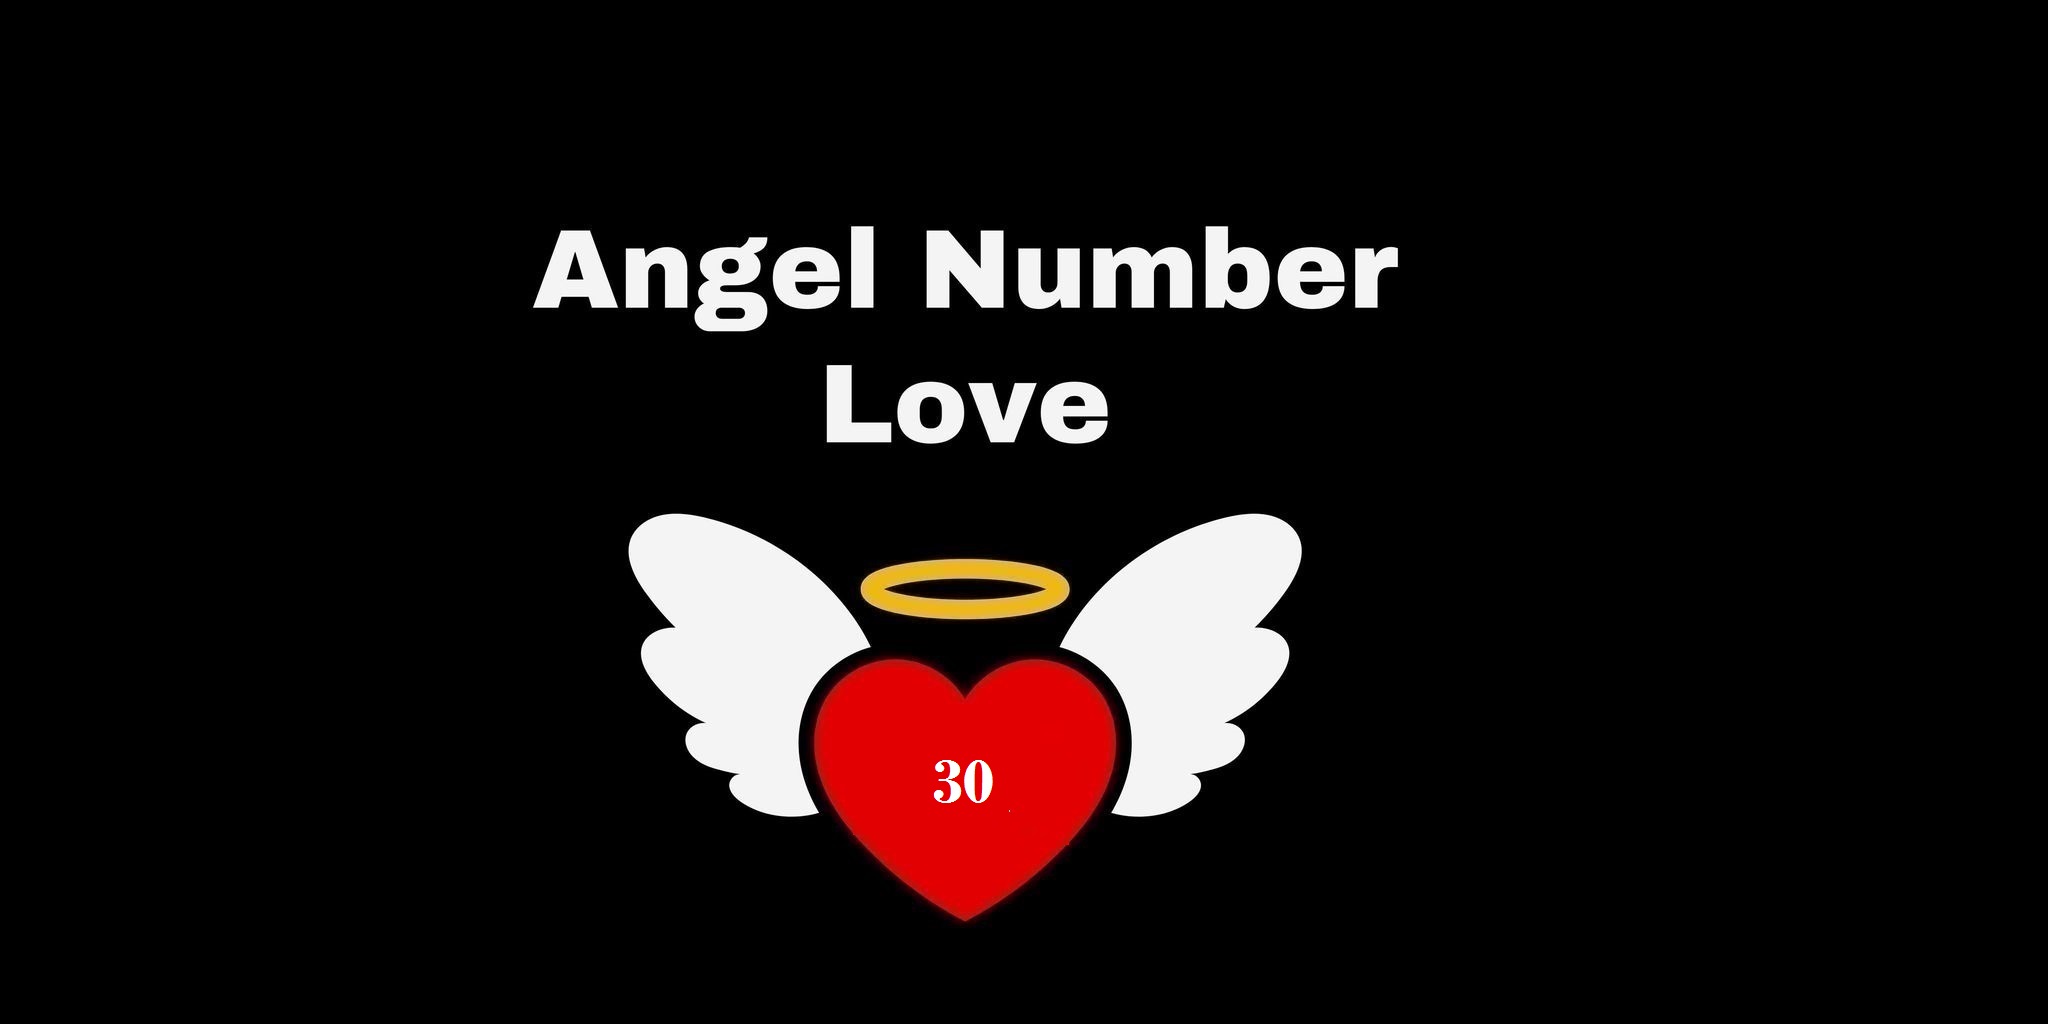 30 Angel Number Meaning In Love